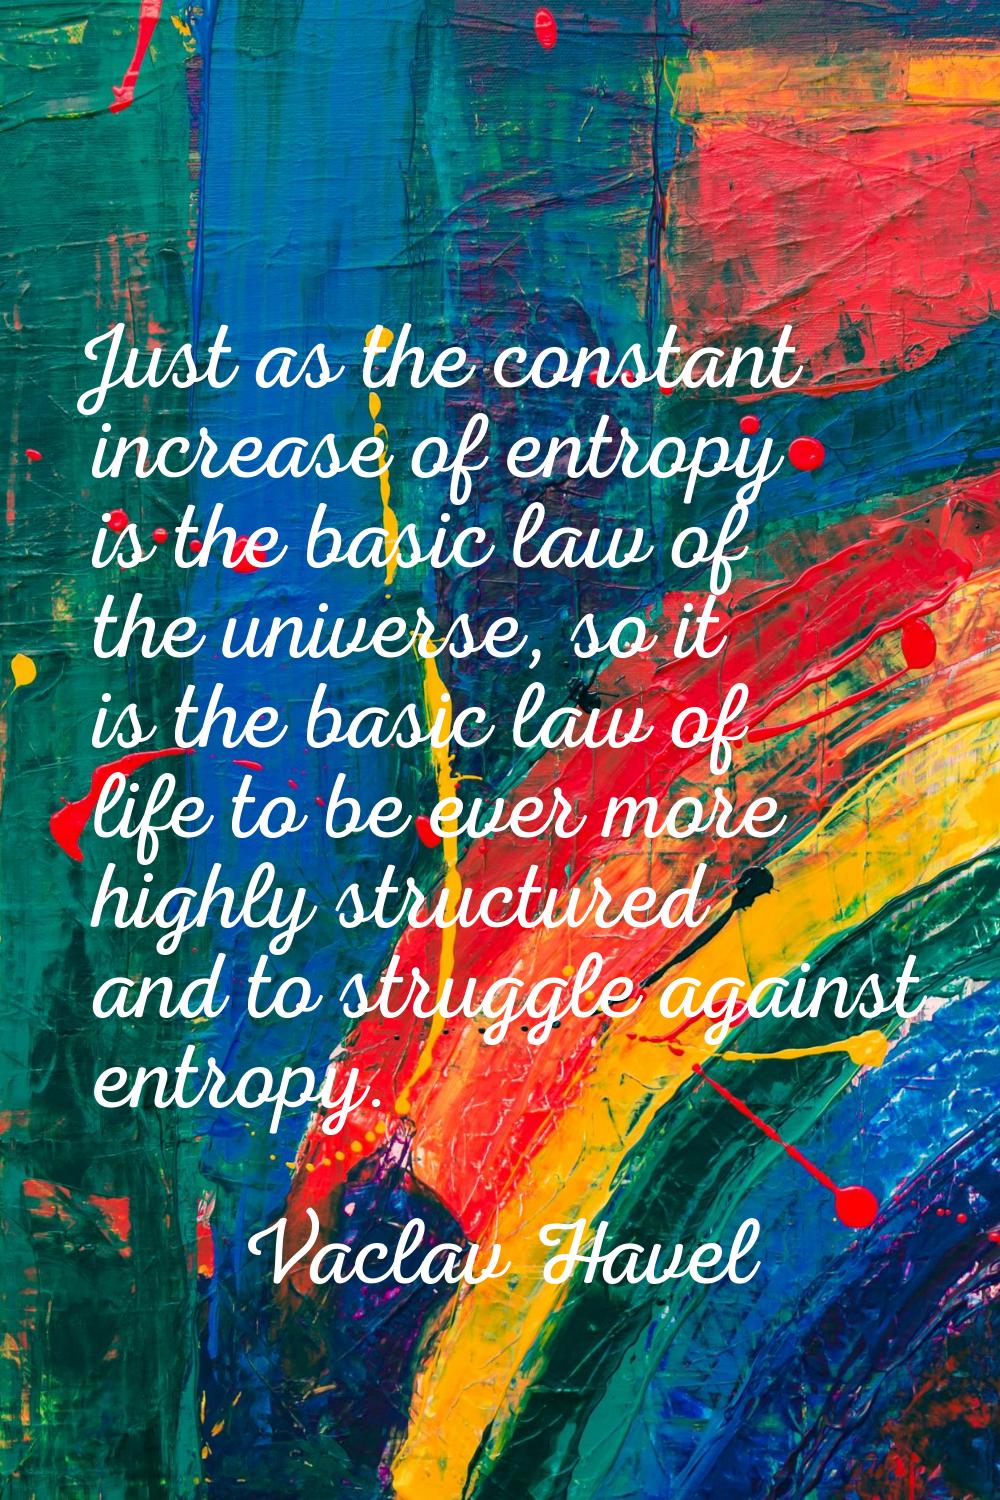 Just as the constant increase of entropy is the basic law of the universe, so it is the basic law o